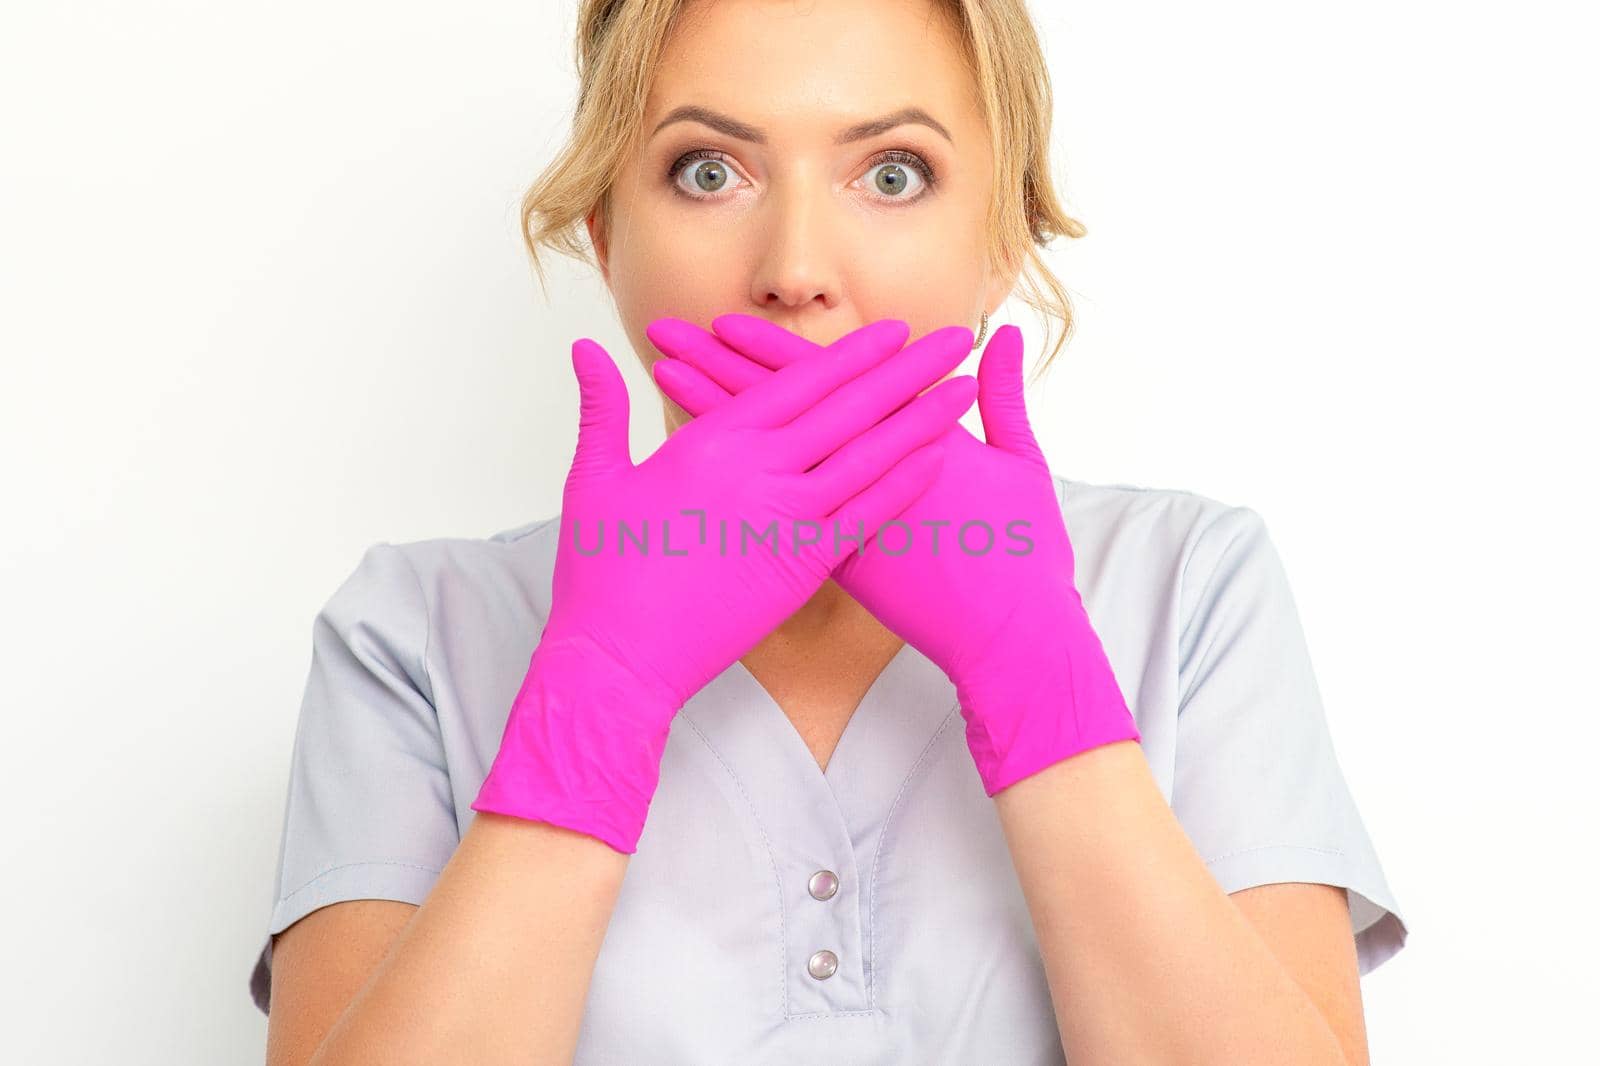 Portrait of a young female caucasian doctor or nurse is shocked covering her mouth with her pink gloved hands against a white background. by okskukuruza